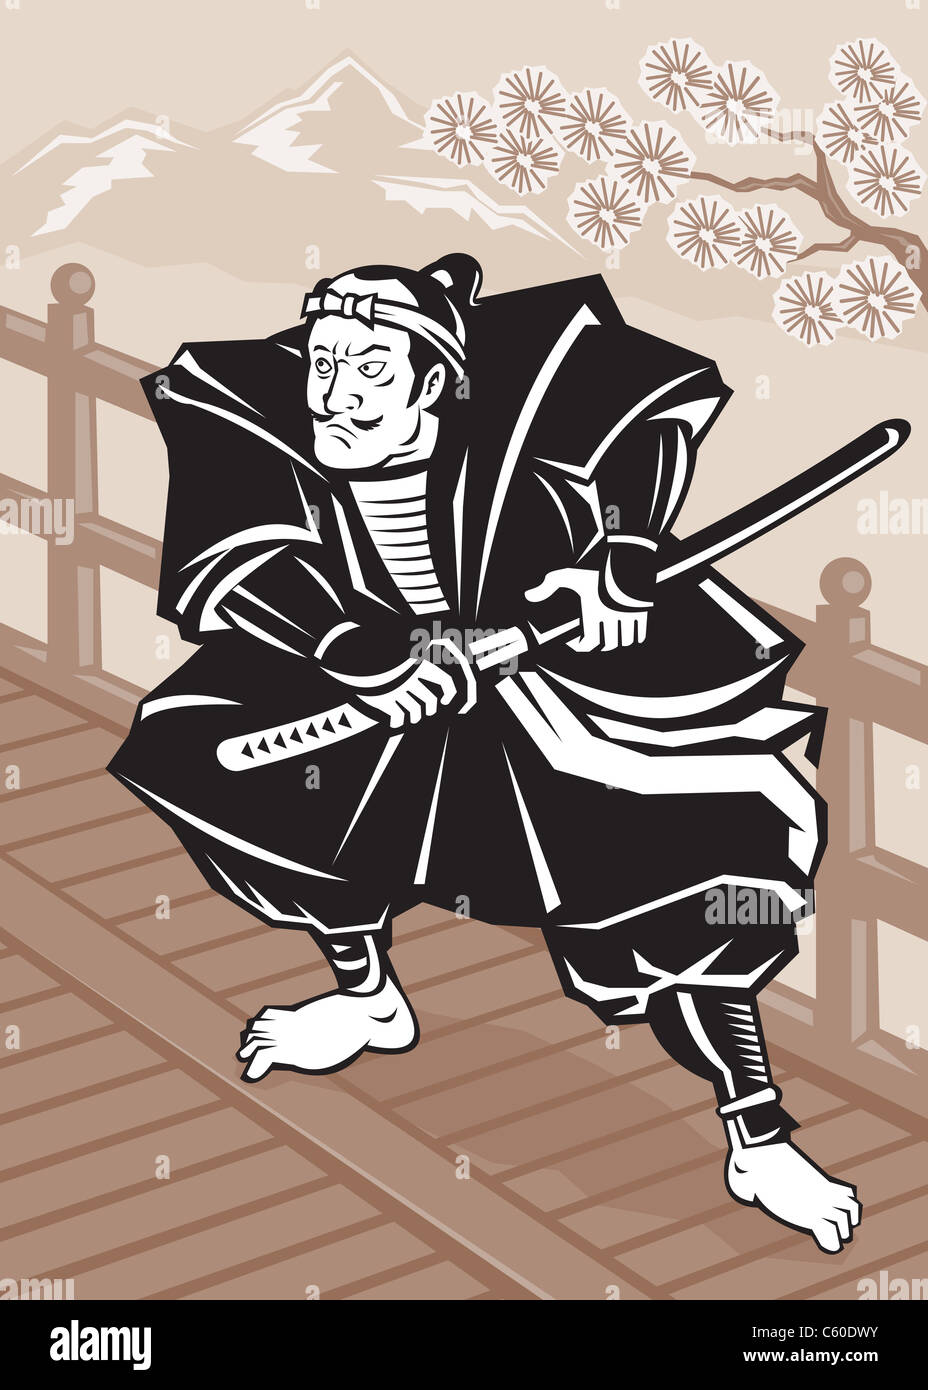 illustration of a Japanese Samurai warrior sword on bridge with tree and mountains in background done in retro woodcut style Stock Photo